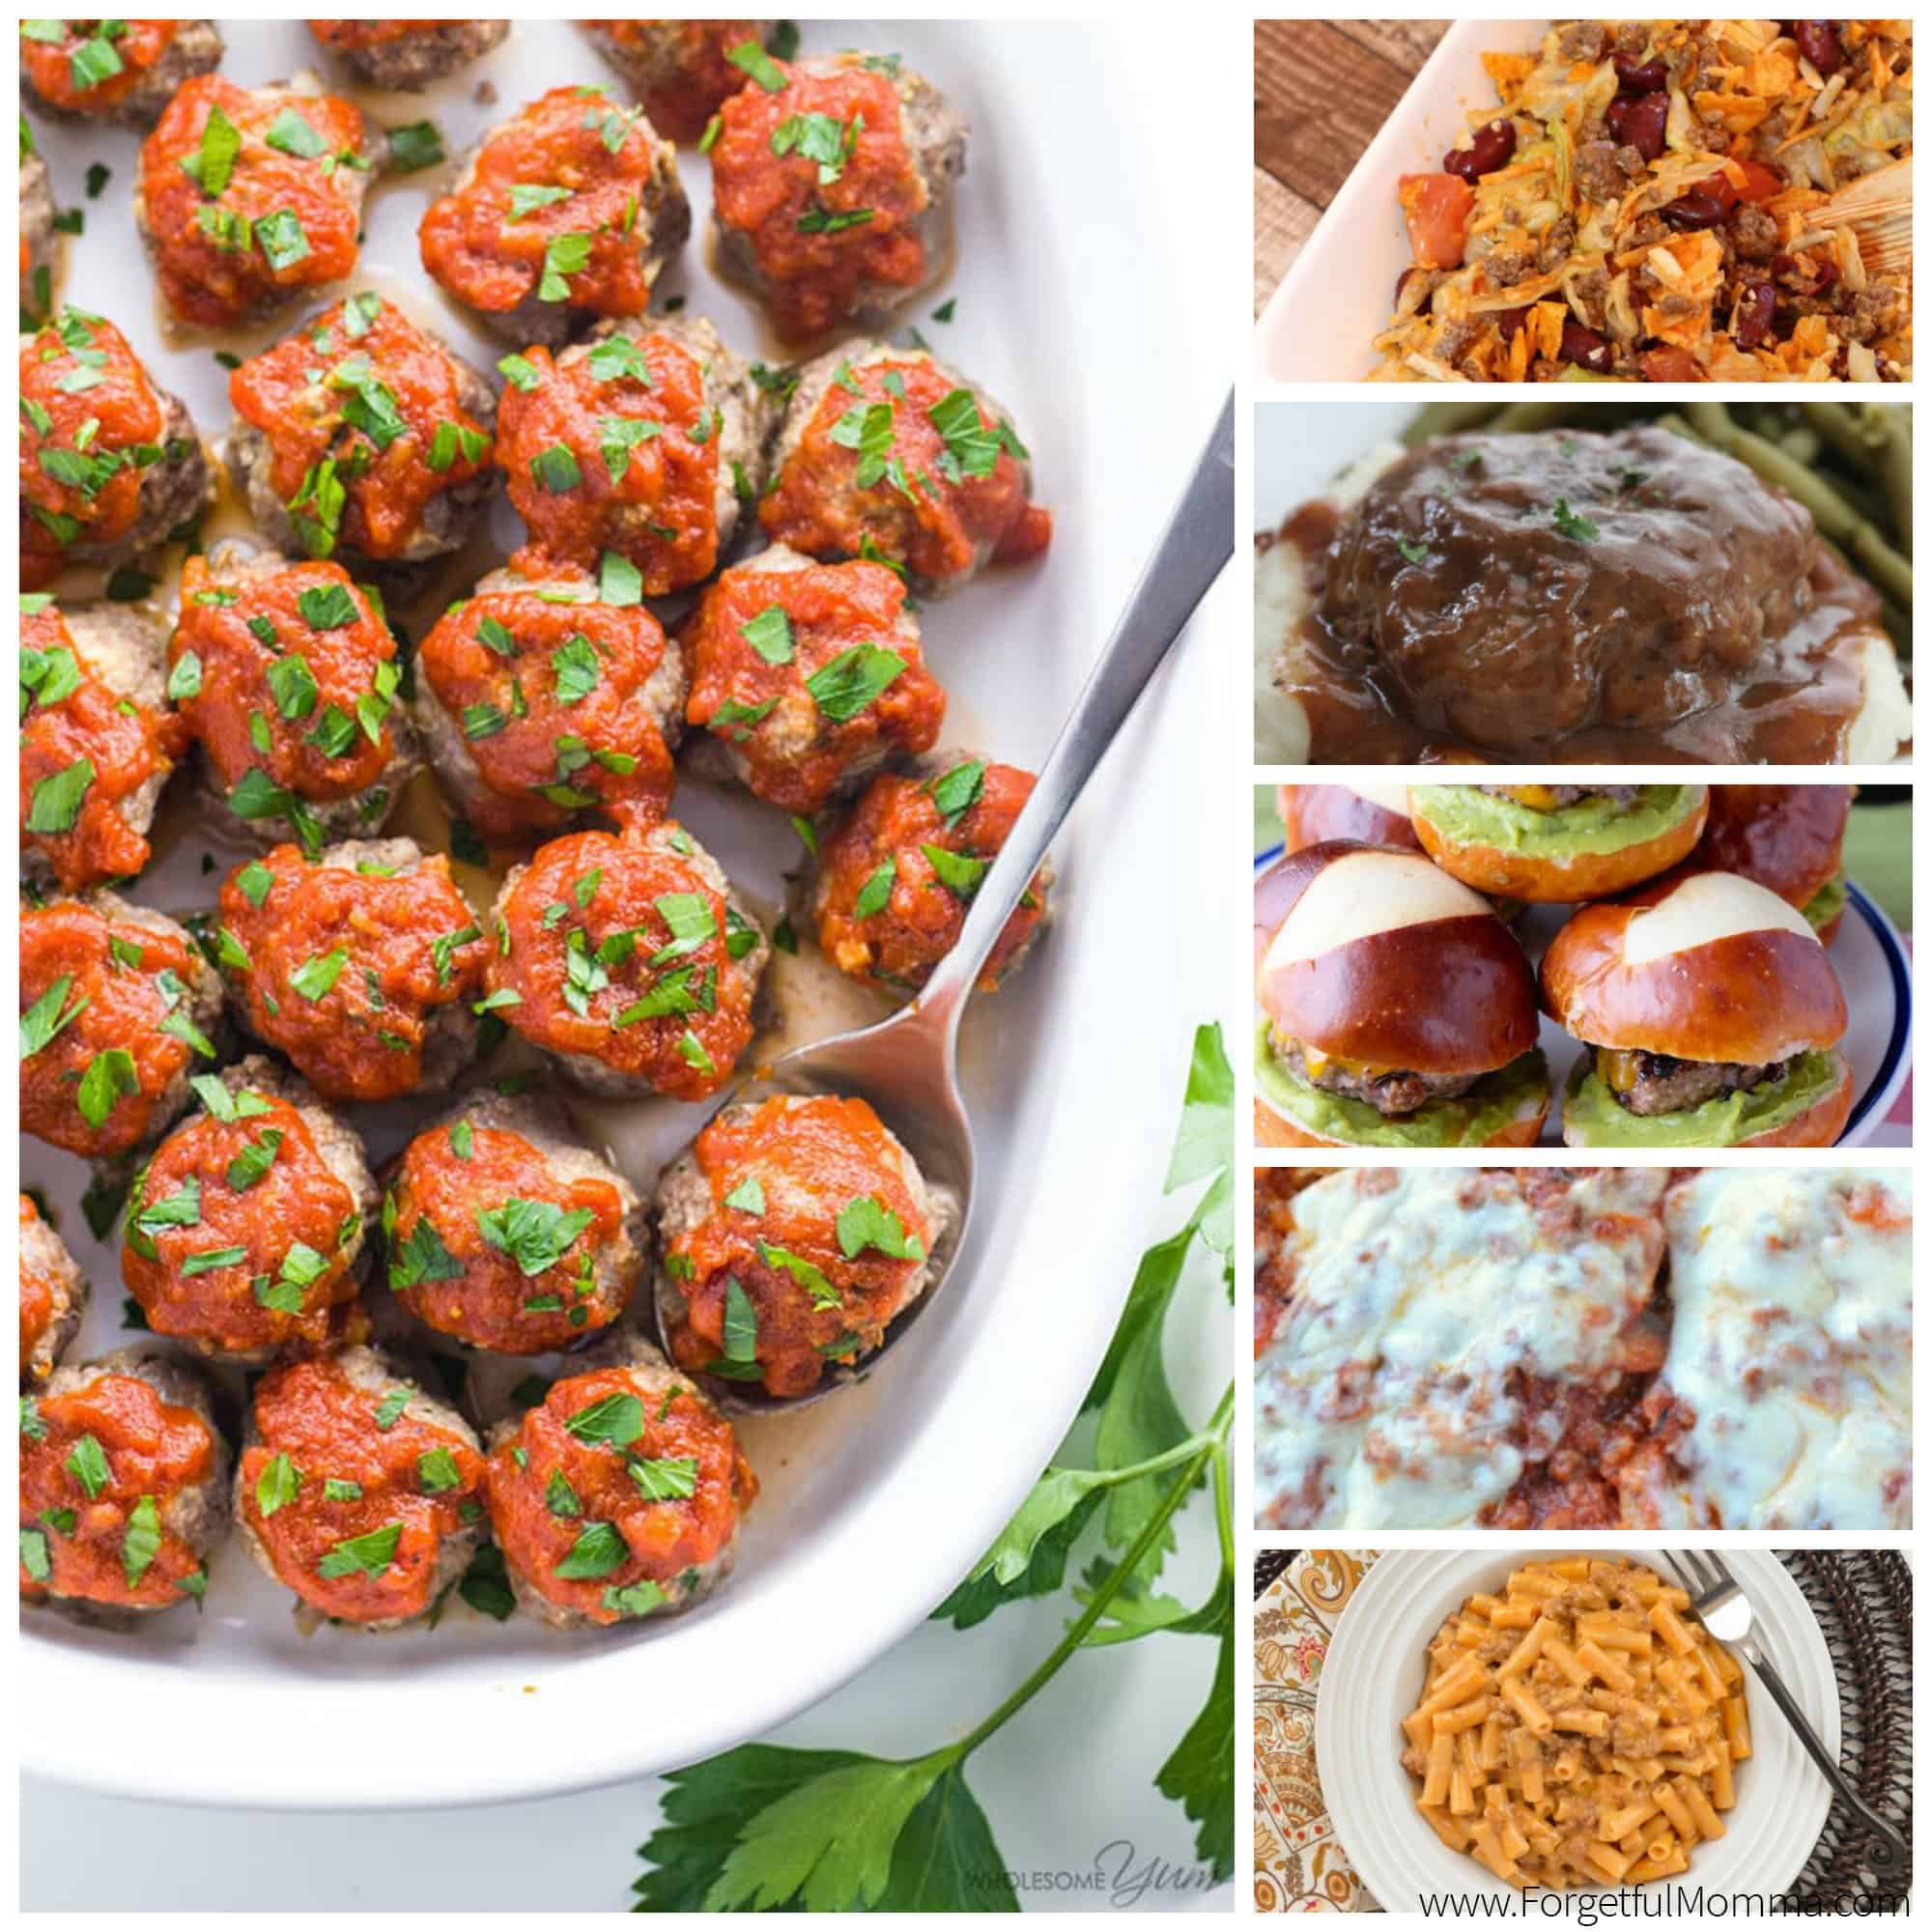 Ground Beef Recipes Ready in 30 Minutes or Less